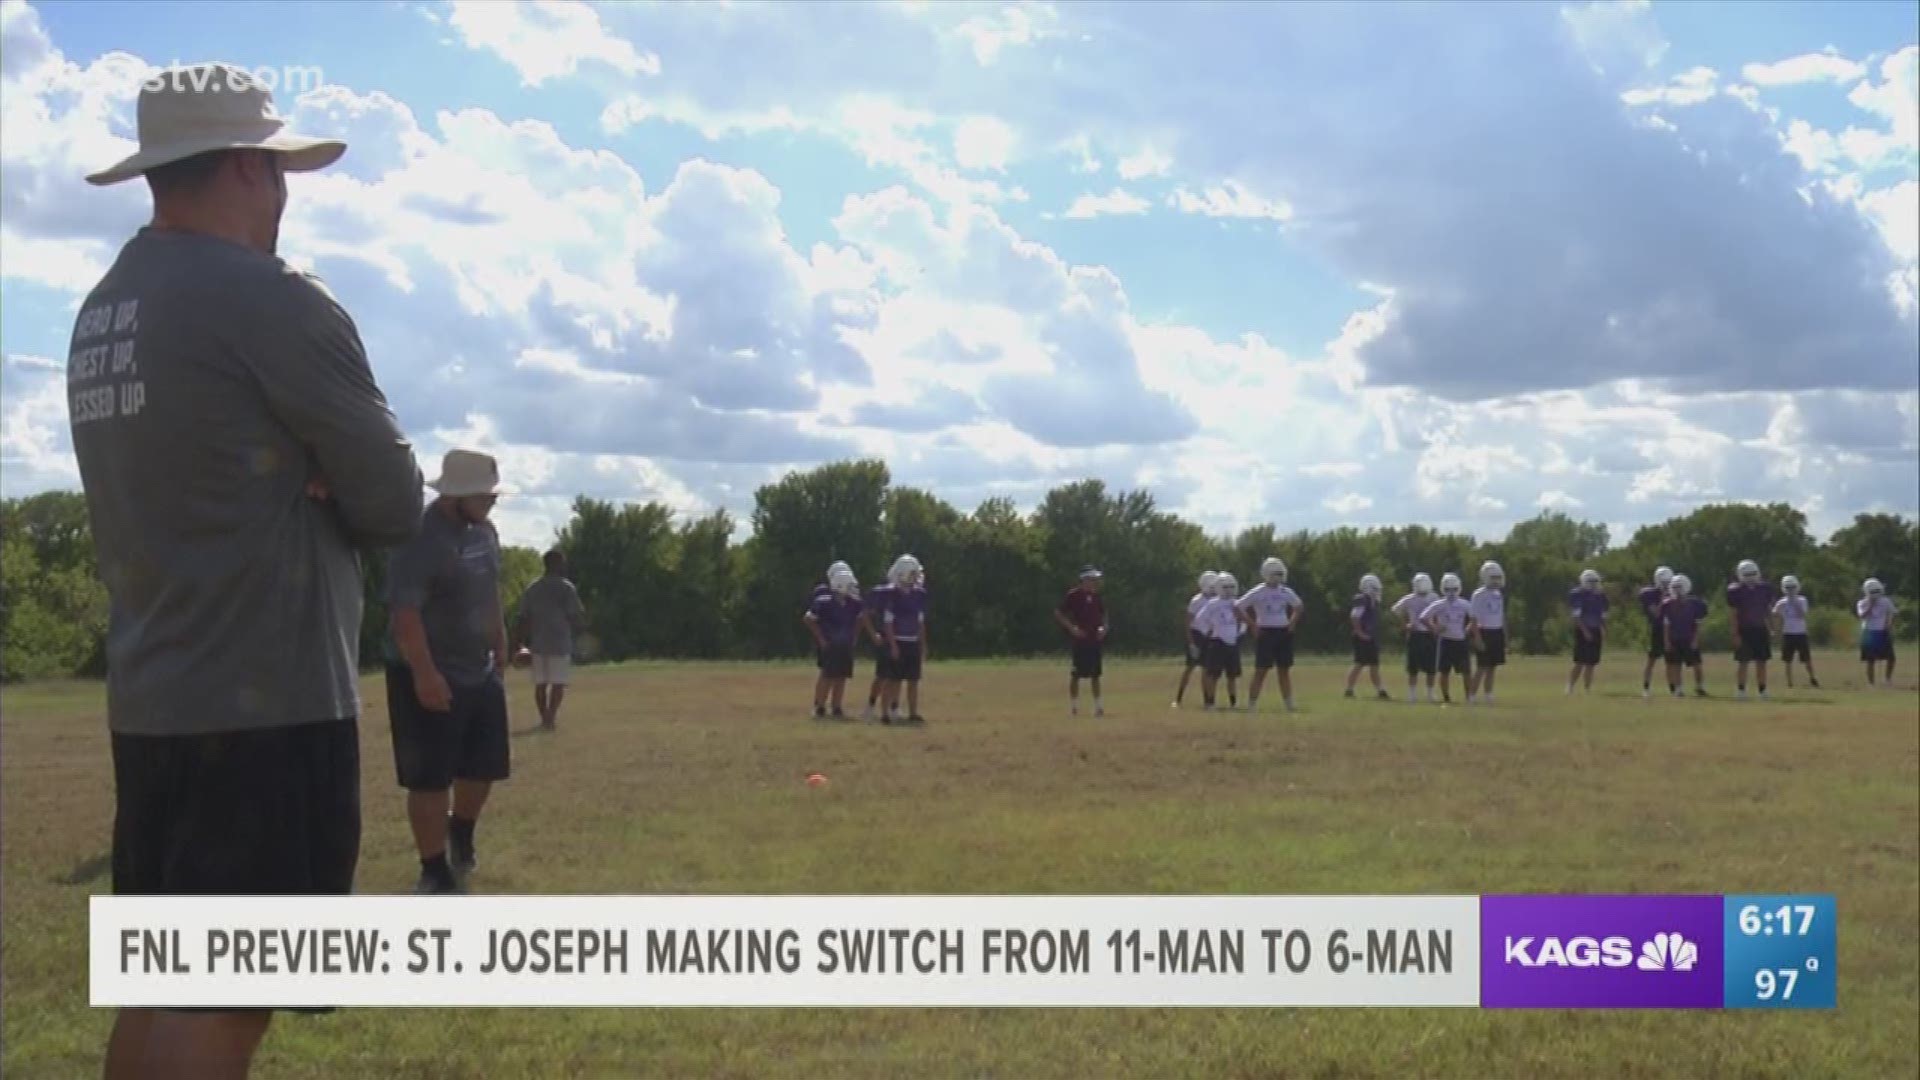 There's big changes coming to St. Joseph in 2018. The Eagles are making the switch from 11-man to 6-man. And with that comes confidence they can compete after winning only one game a year ago.